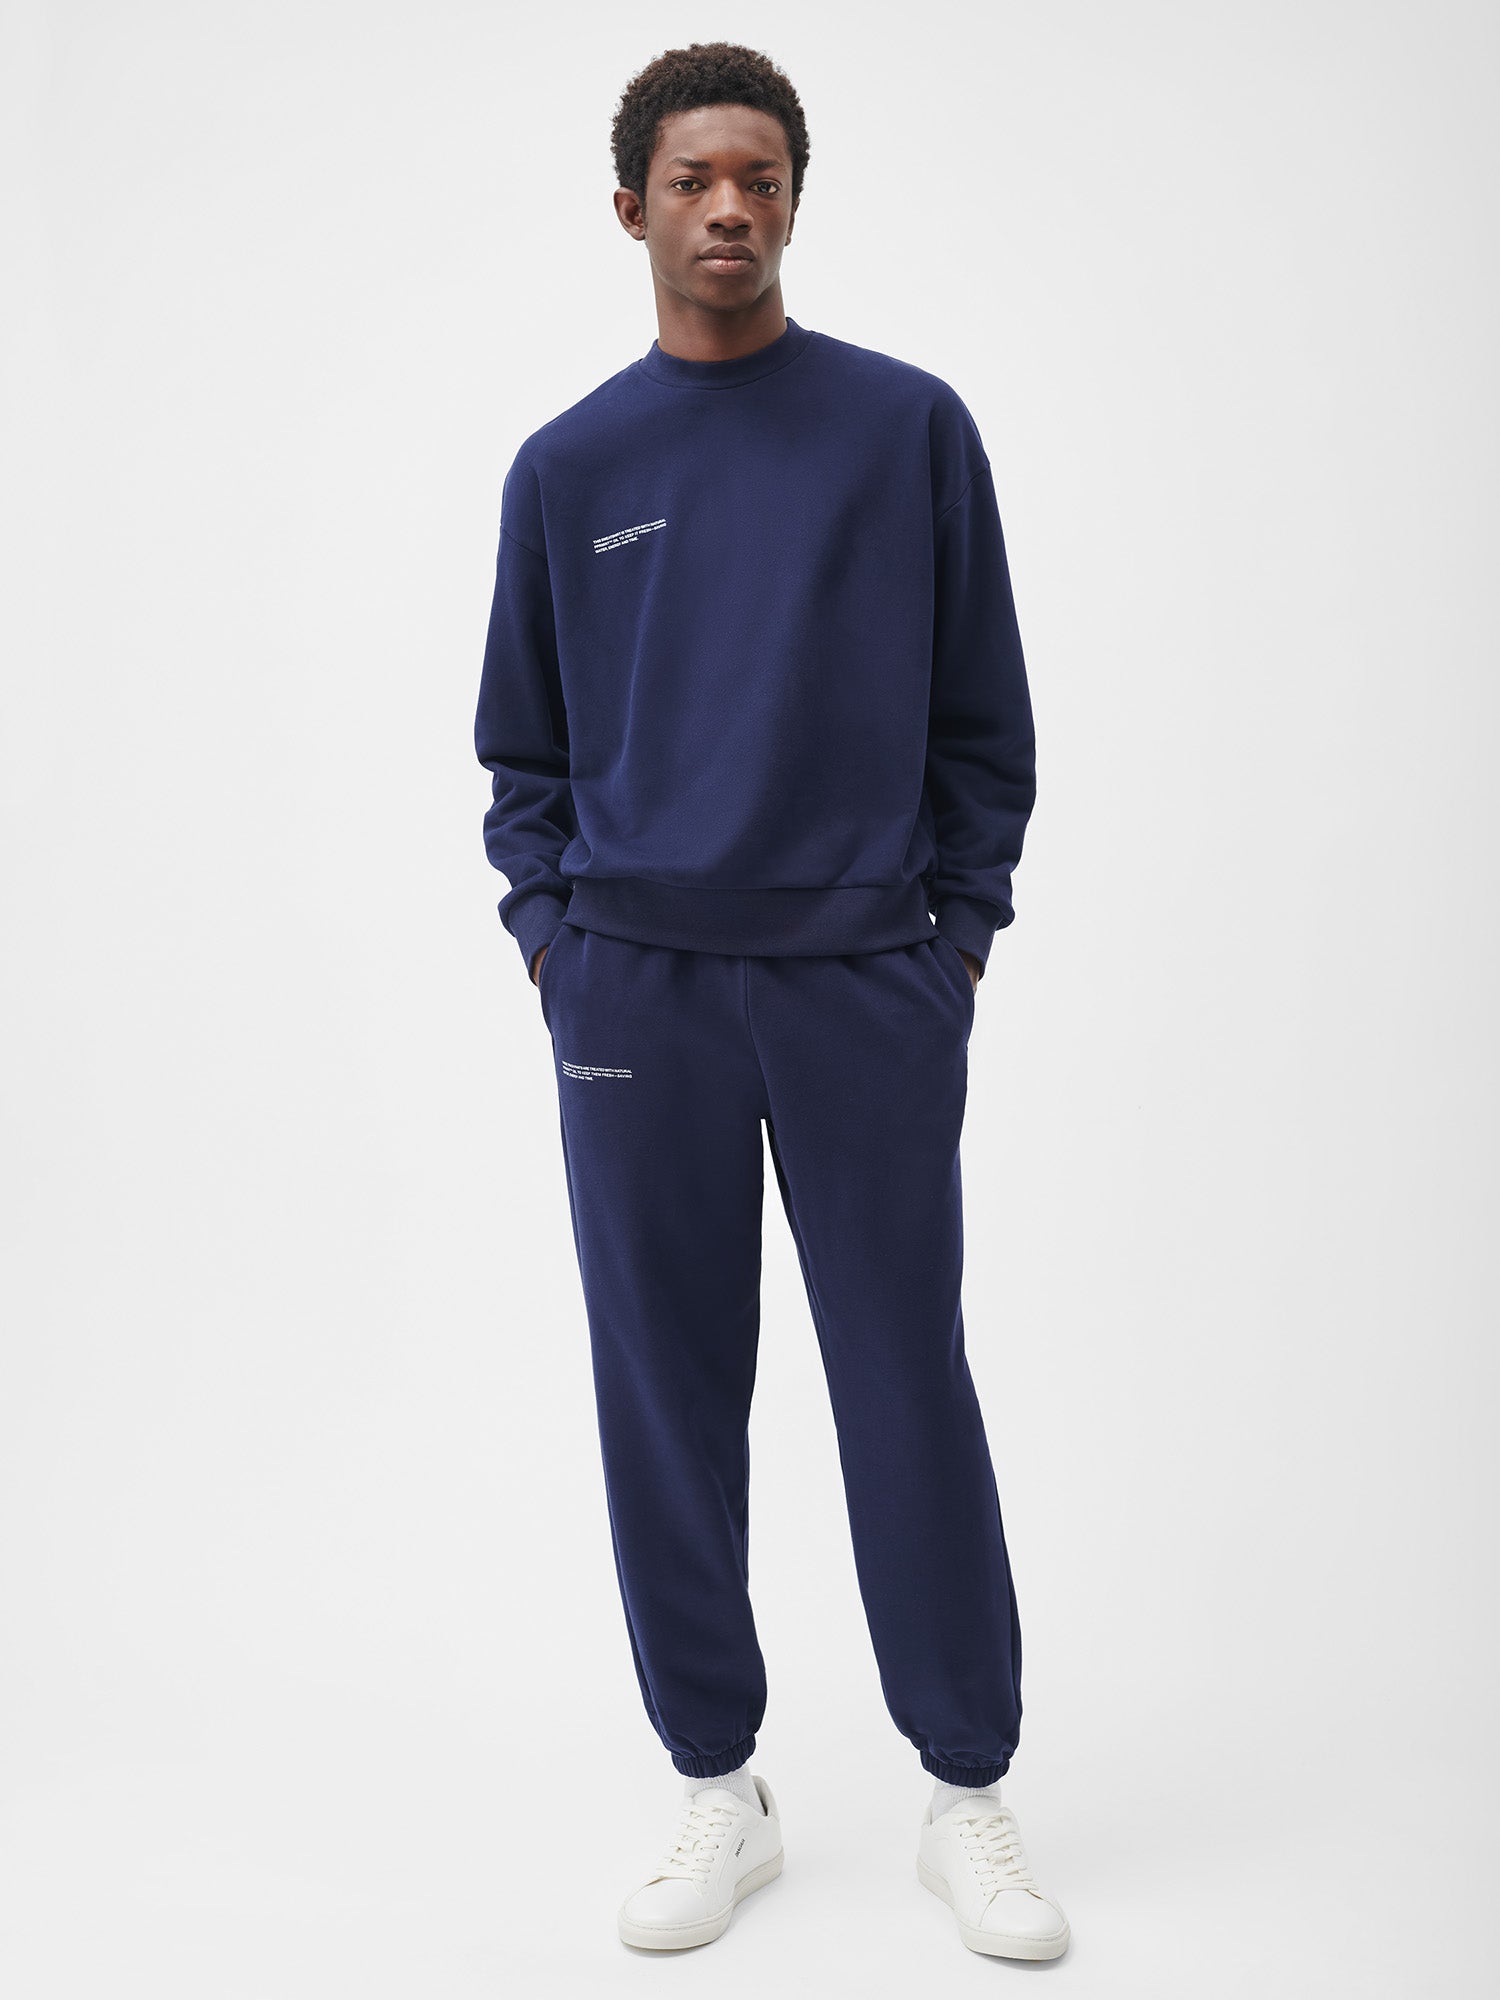 365-Trackpants-Navy-Model-Male-1